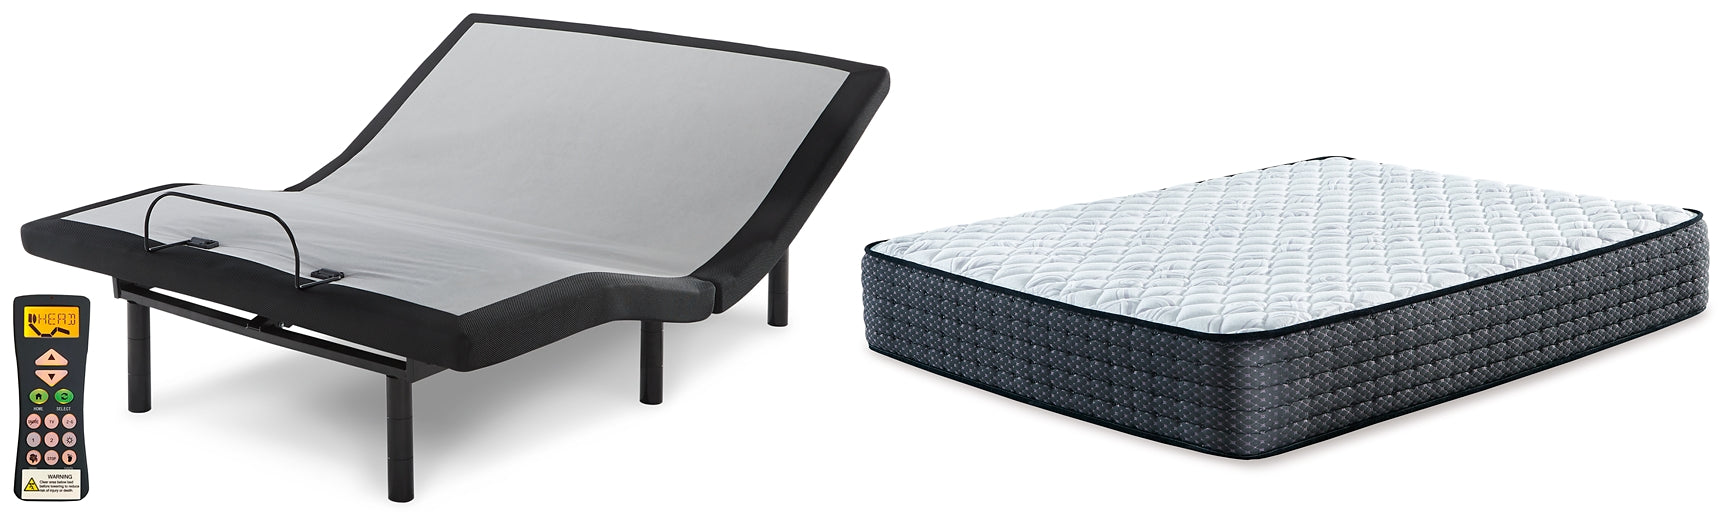 Limited Edition Firm Mattress with Adjustable Base Sierra Sleep® by Ashley